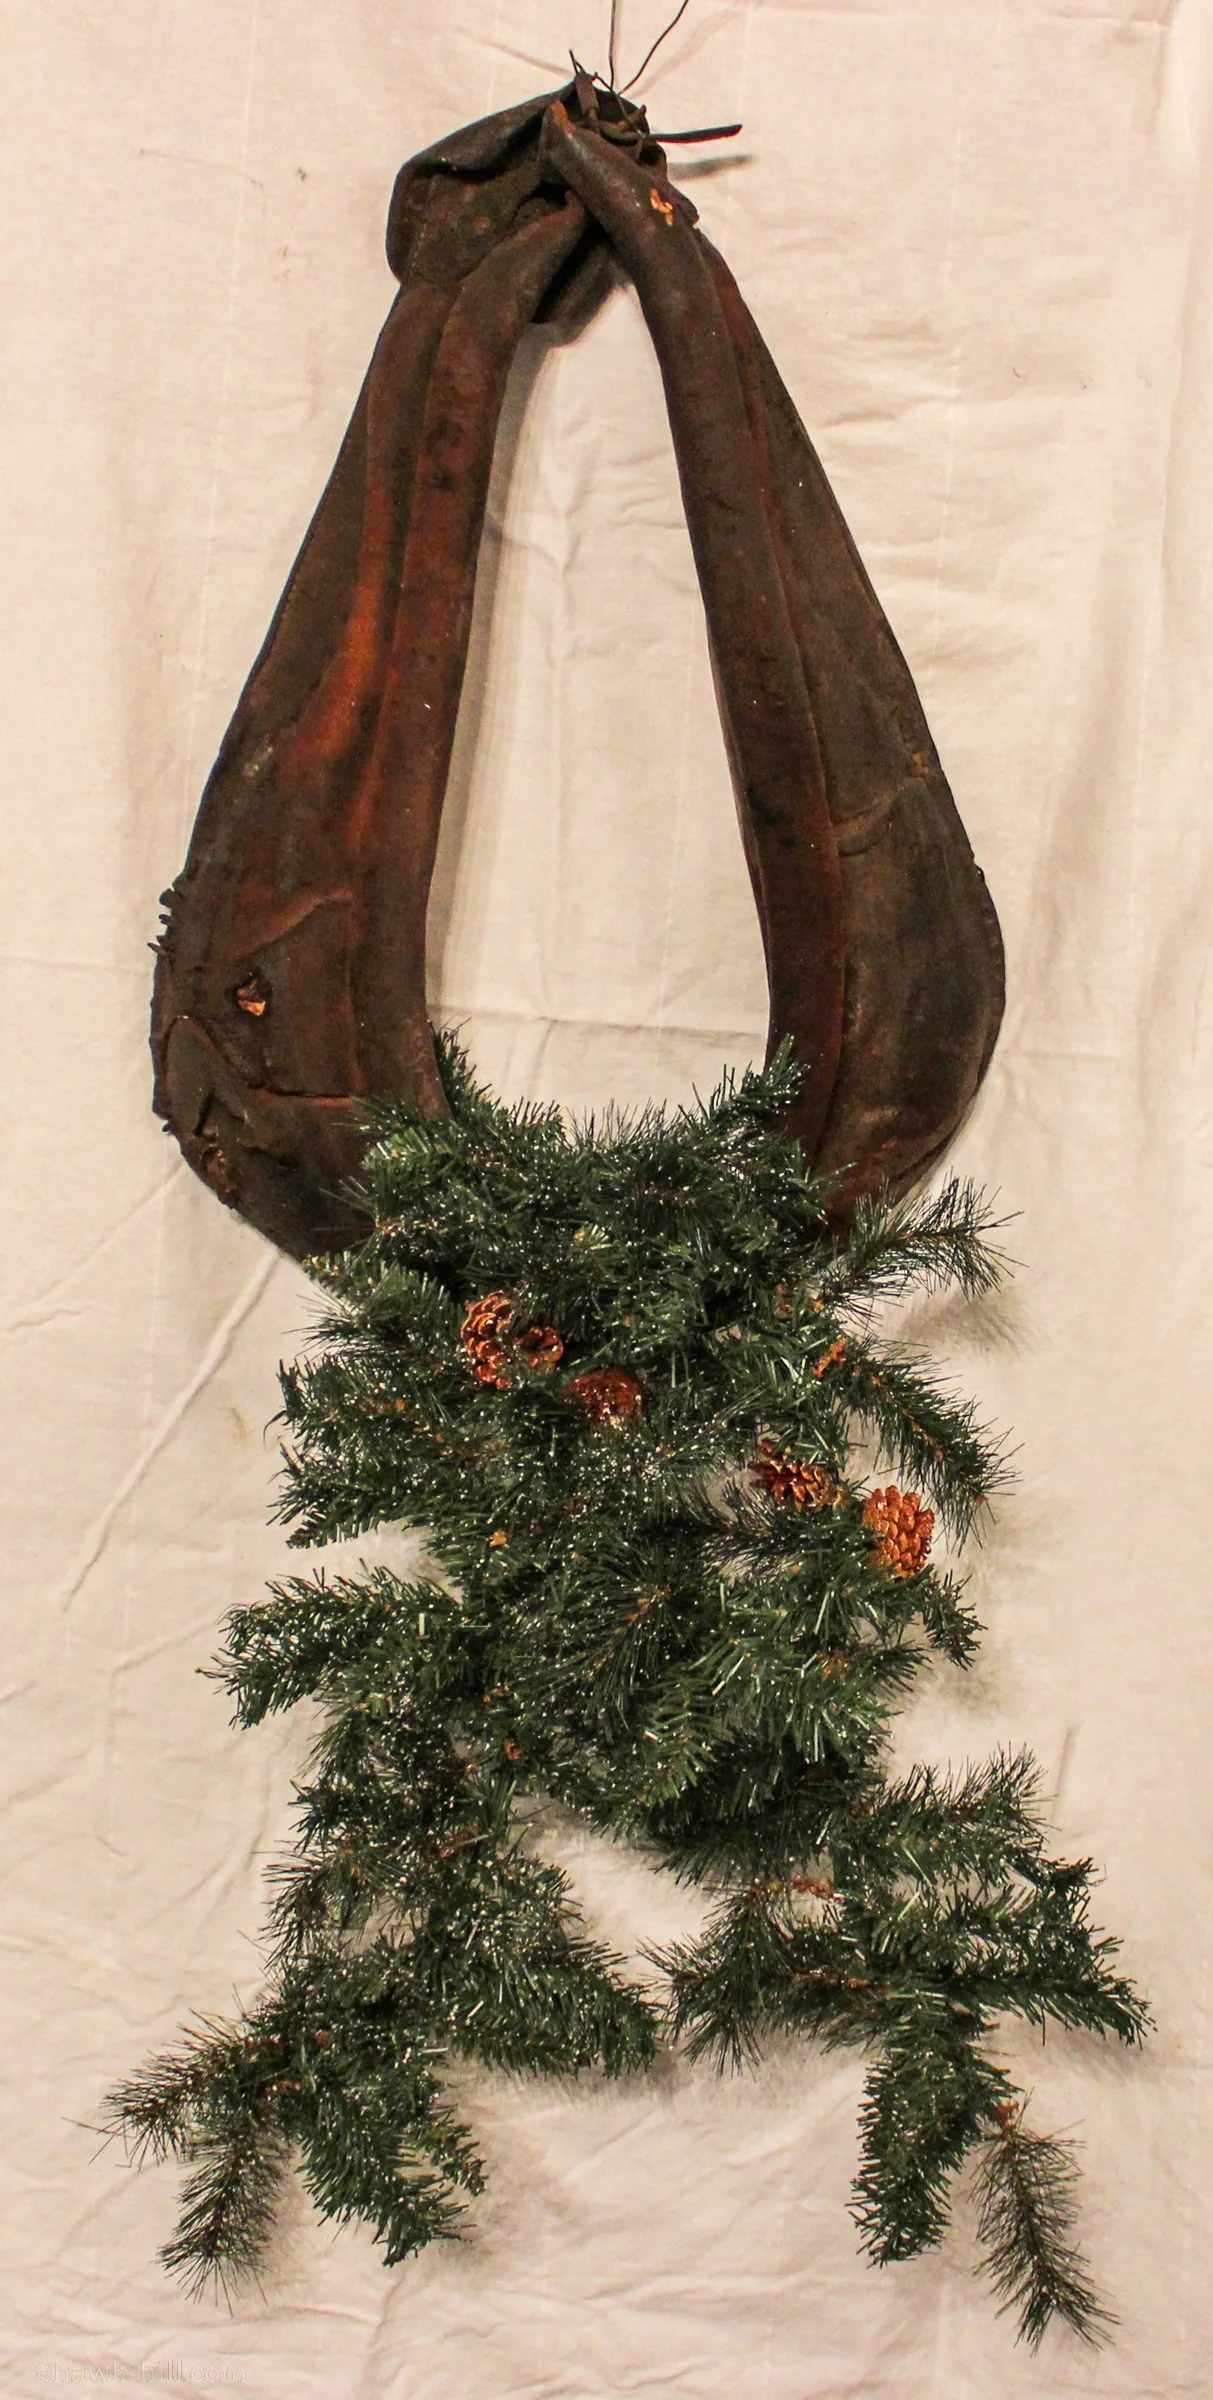 Harness with christmas garland attached.